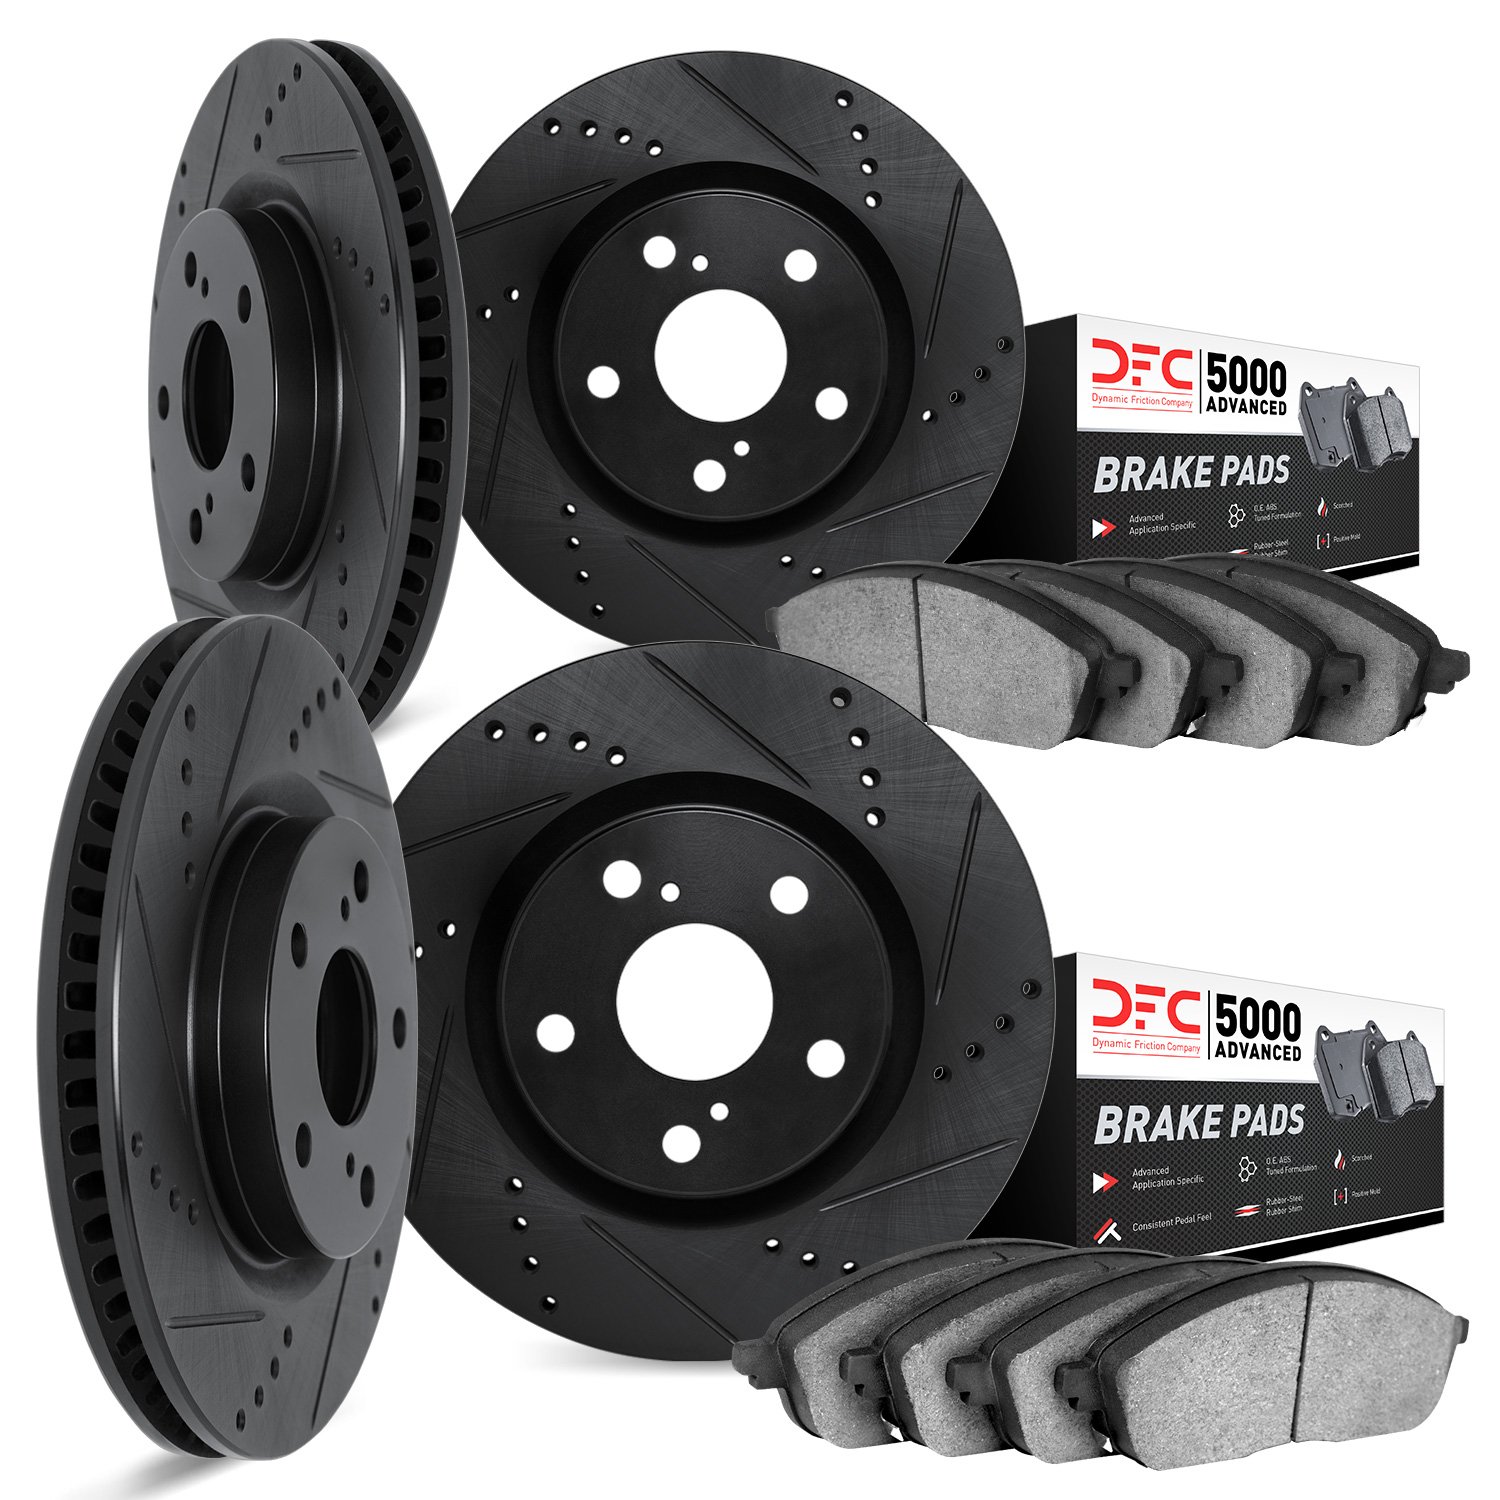 8504-11011 Drilled/Slotted Brake Rotors w/5000 Advanced Brake Pads Kit [Black], 2014-2017 Land Rover, Position: Front and Rear